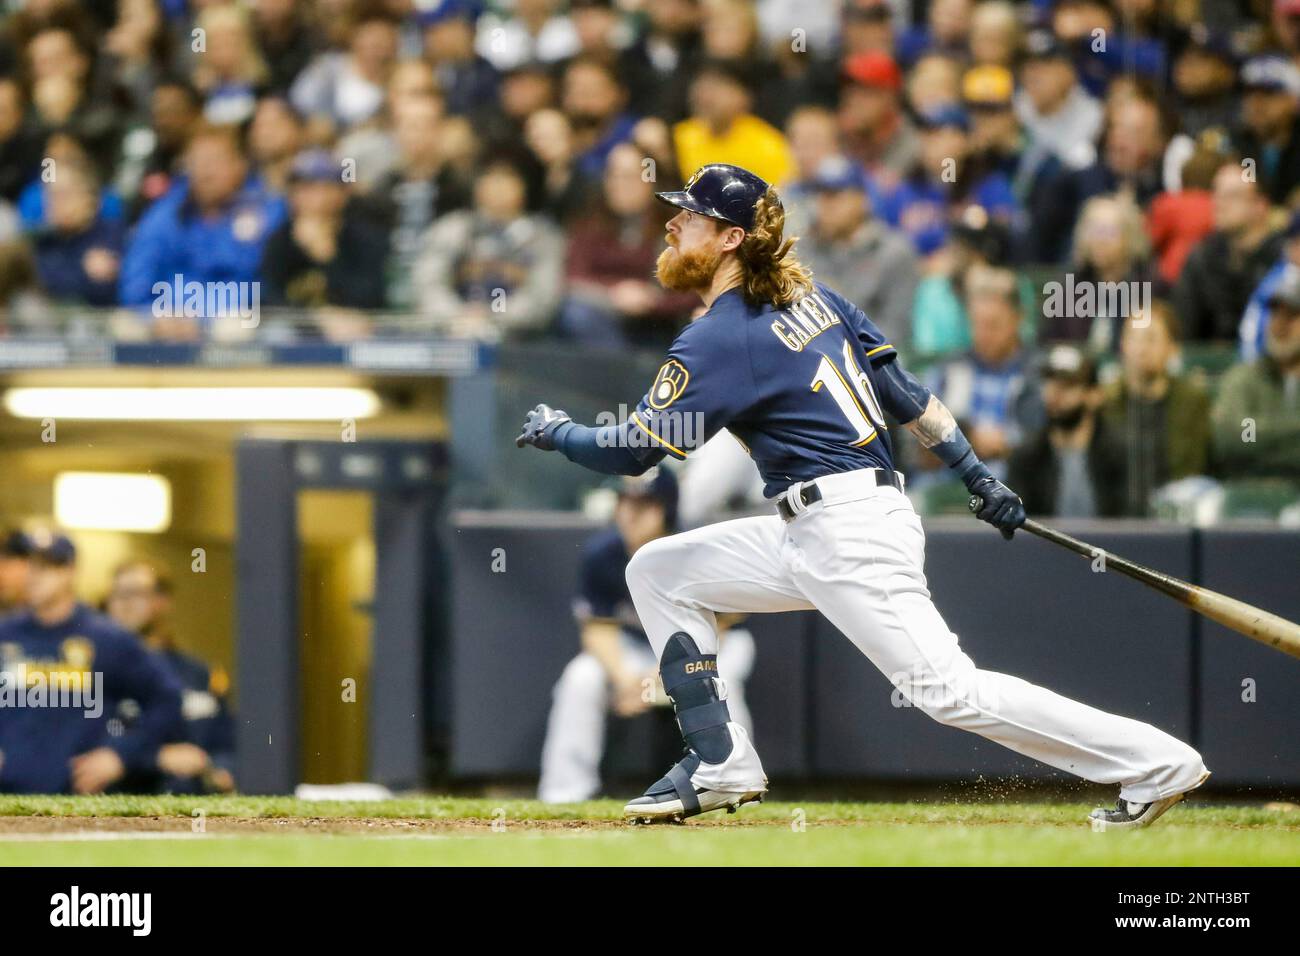 Unexpected opportunity excites Brewers outfielder Ben Gamel